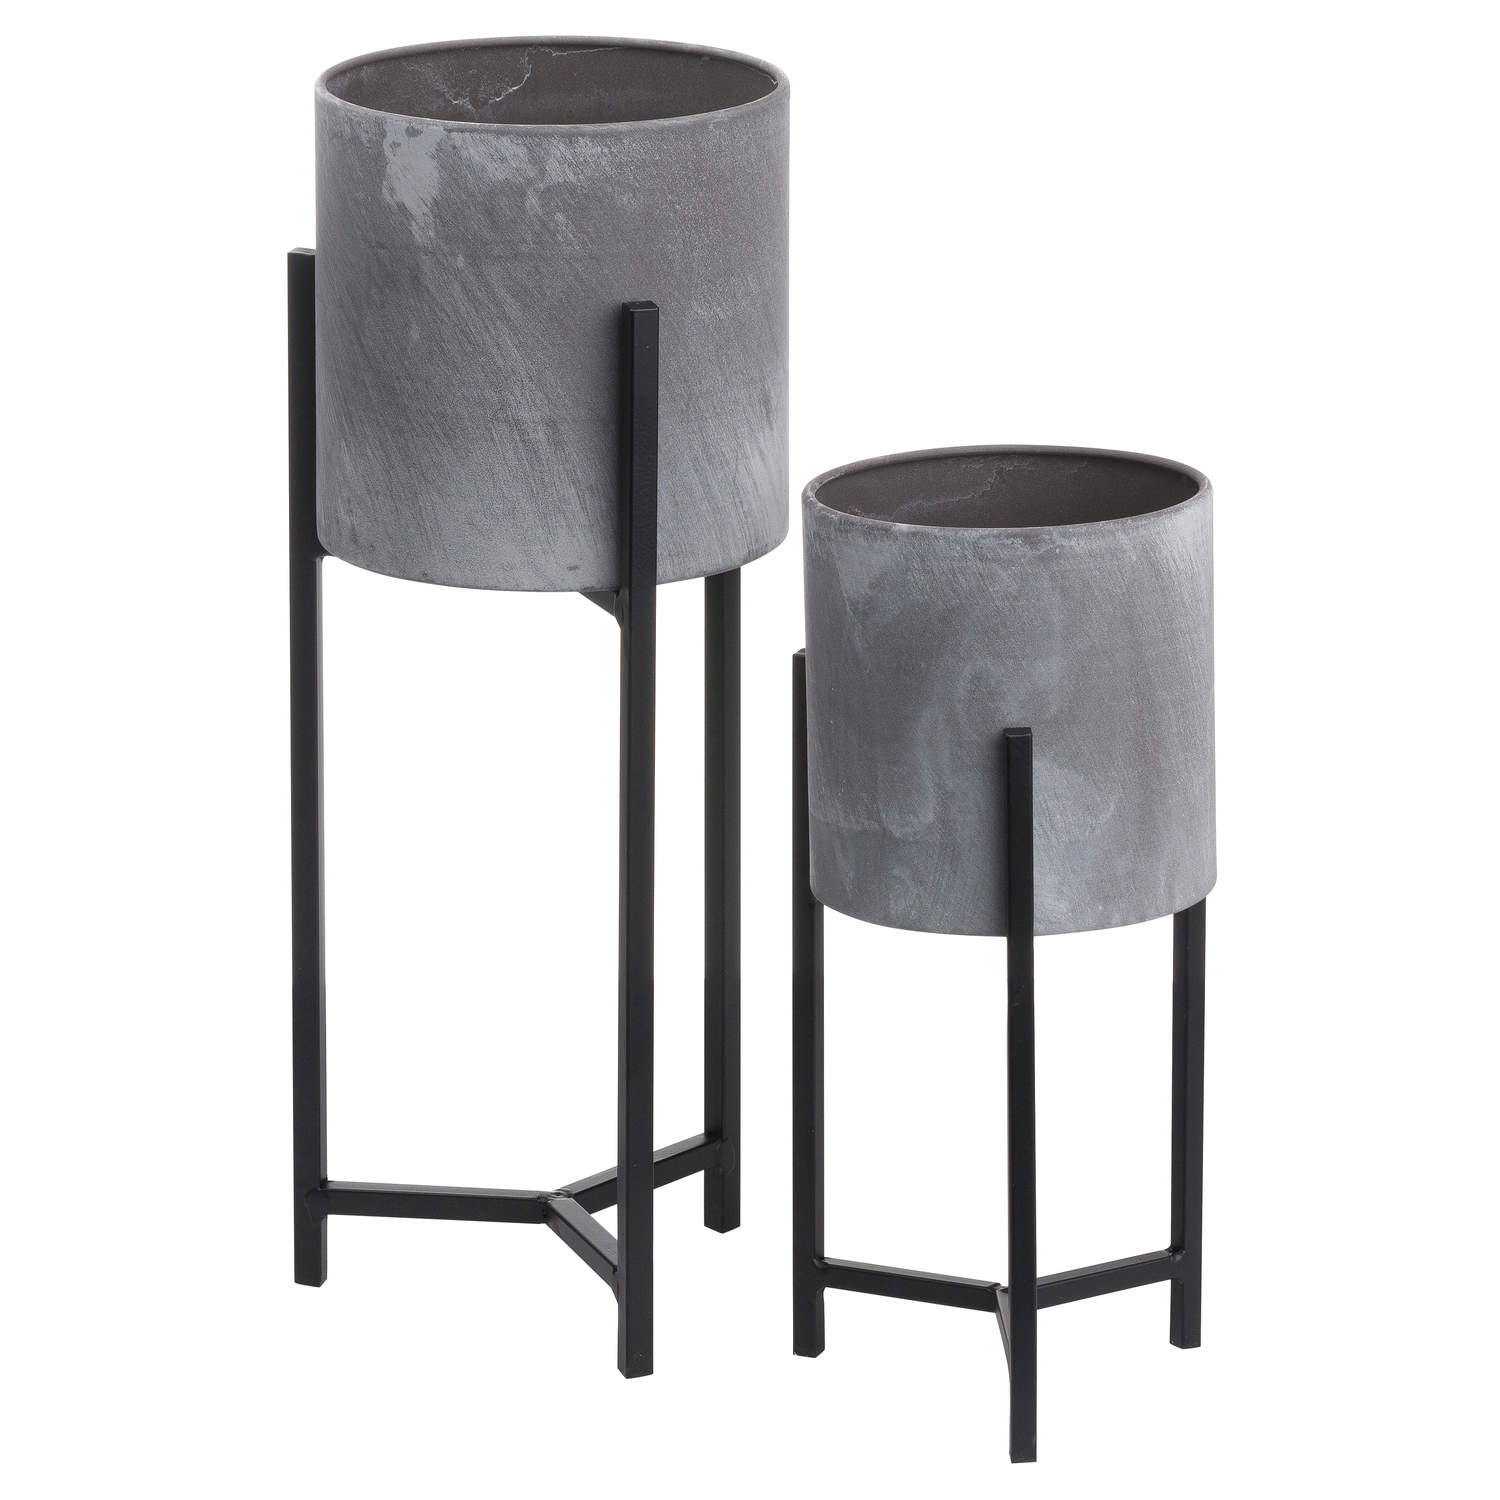 Set Of Two Concrete Effect Table Top Planter - Image 1